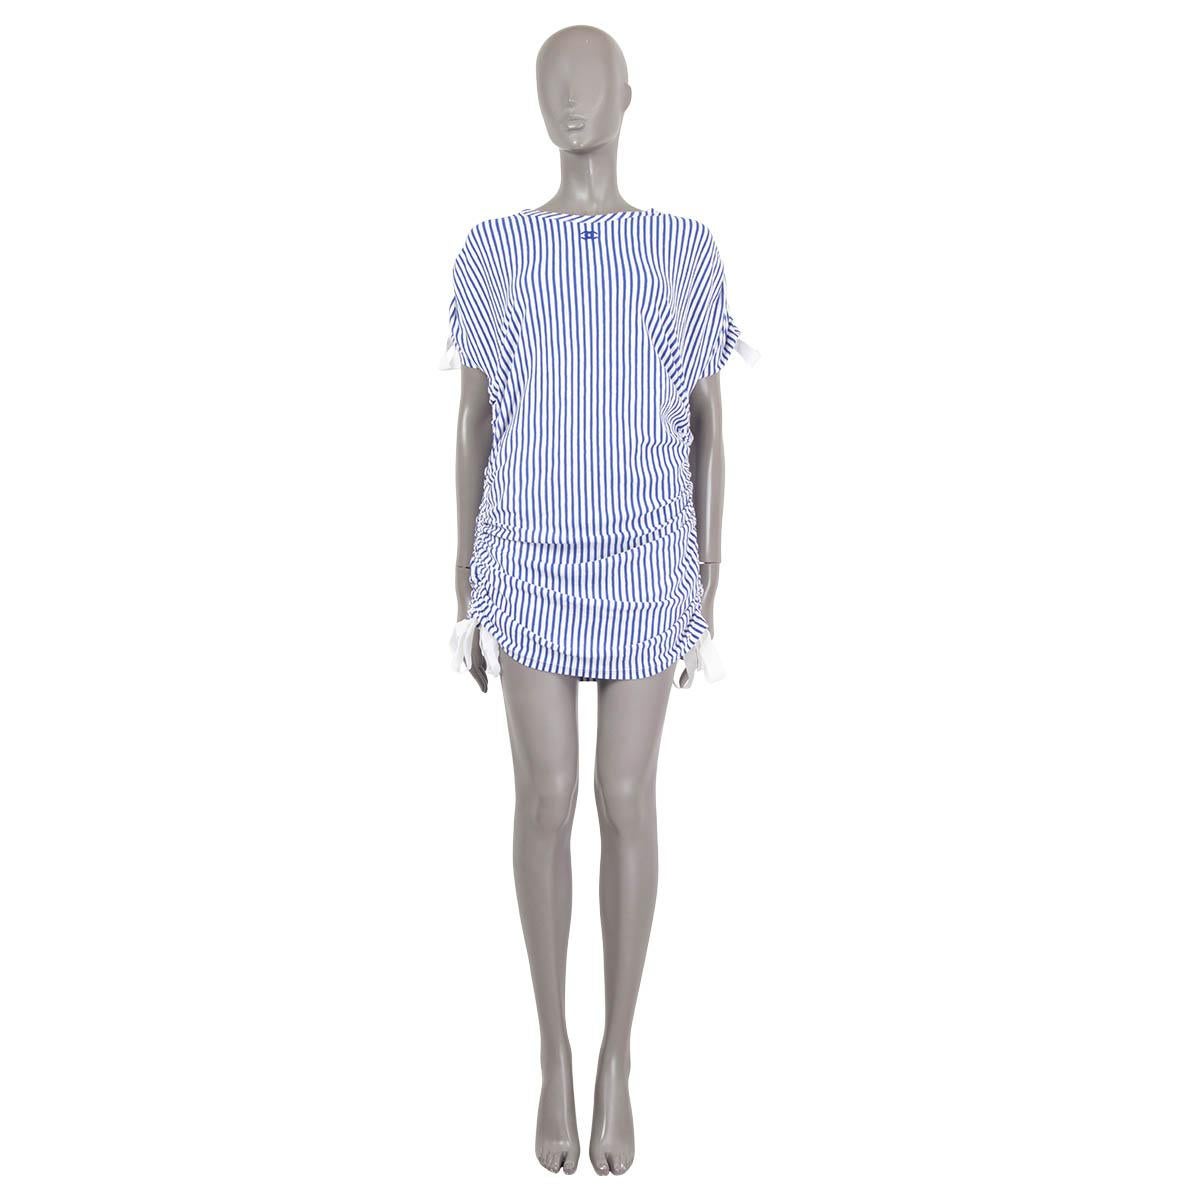 100% authentic Chanel short sleeve dress in blue & white striped cotton (65%) and polyester (35%). Featrues a crewneck, an embroidered CC on the front and adjustable sleeves and dress length through ties. Unlined.

2019 La Pausa Resort

See matching